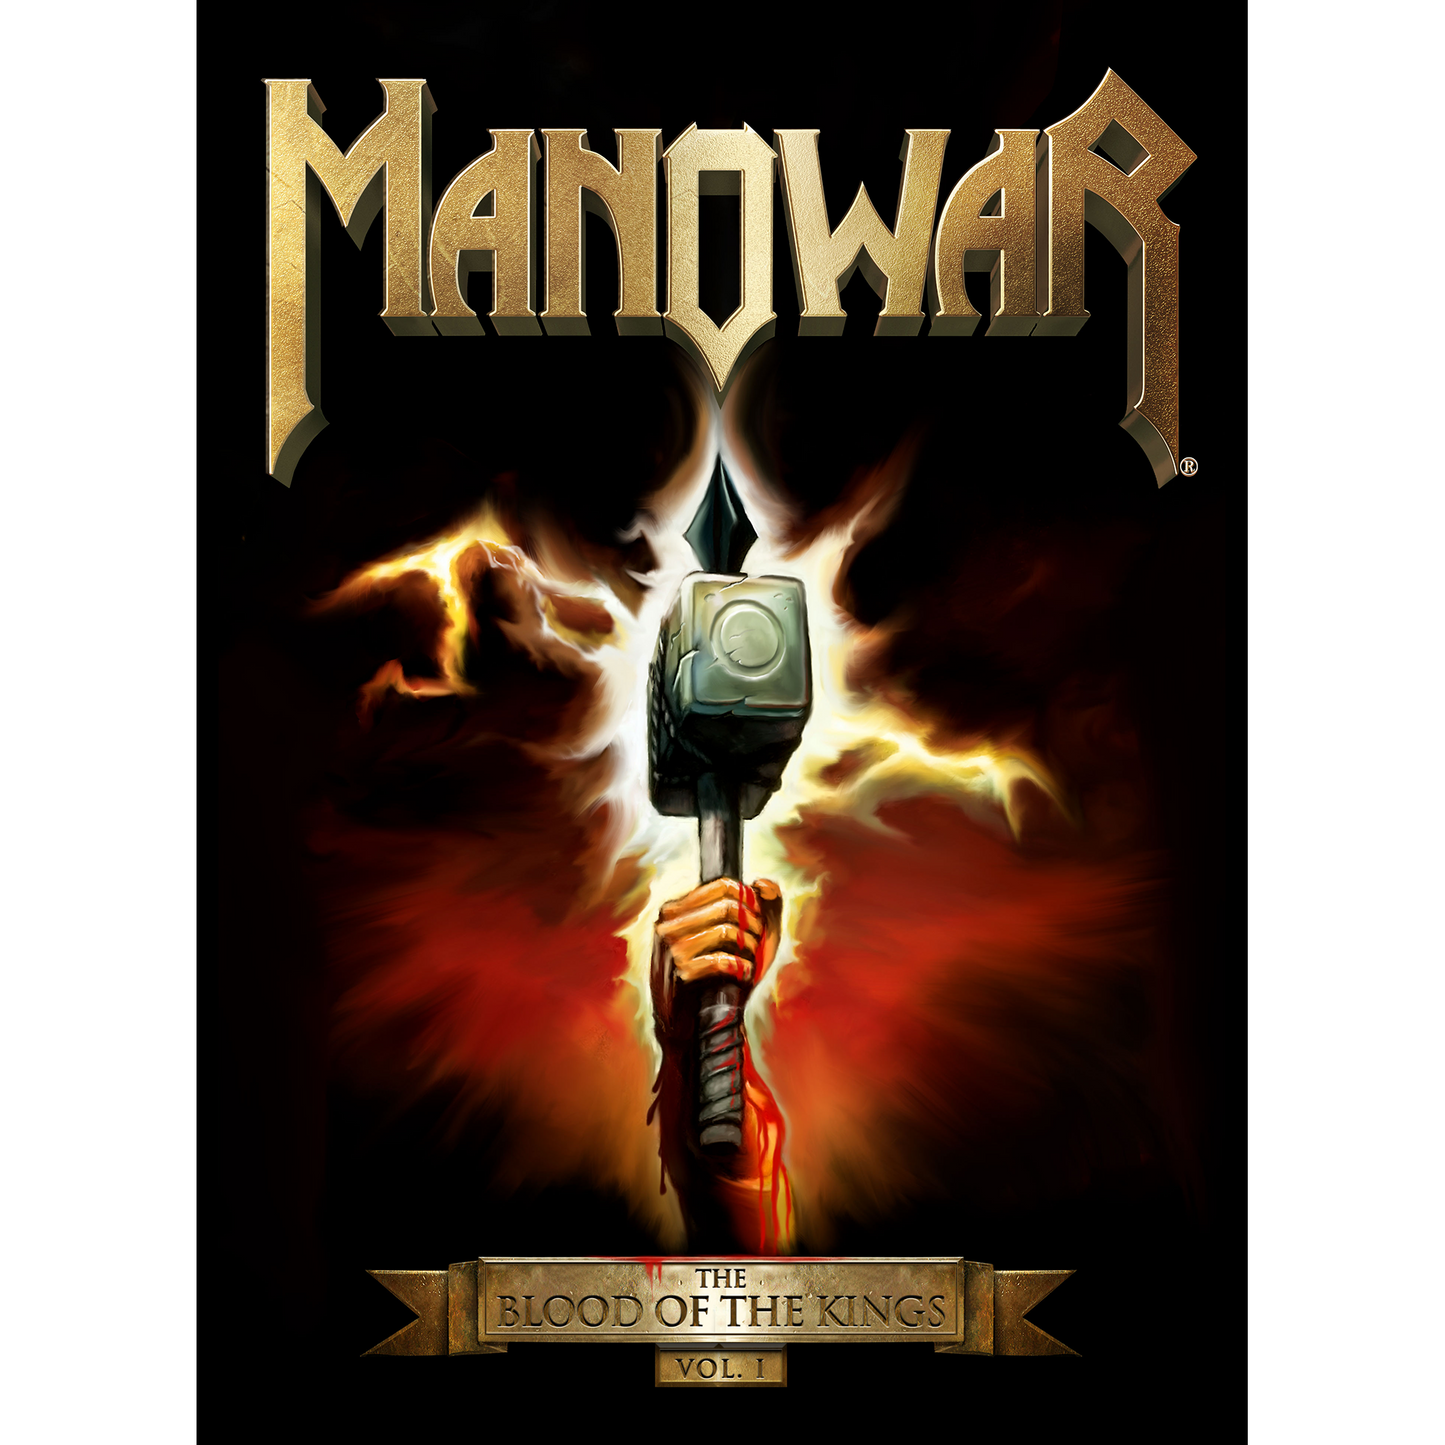 Personalized Autographed Edition Of The Blood Of The Kings Vol. I - The History Of MANOWAR